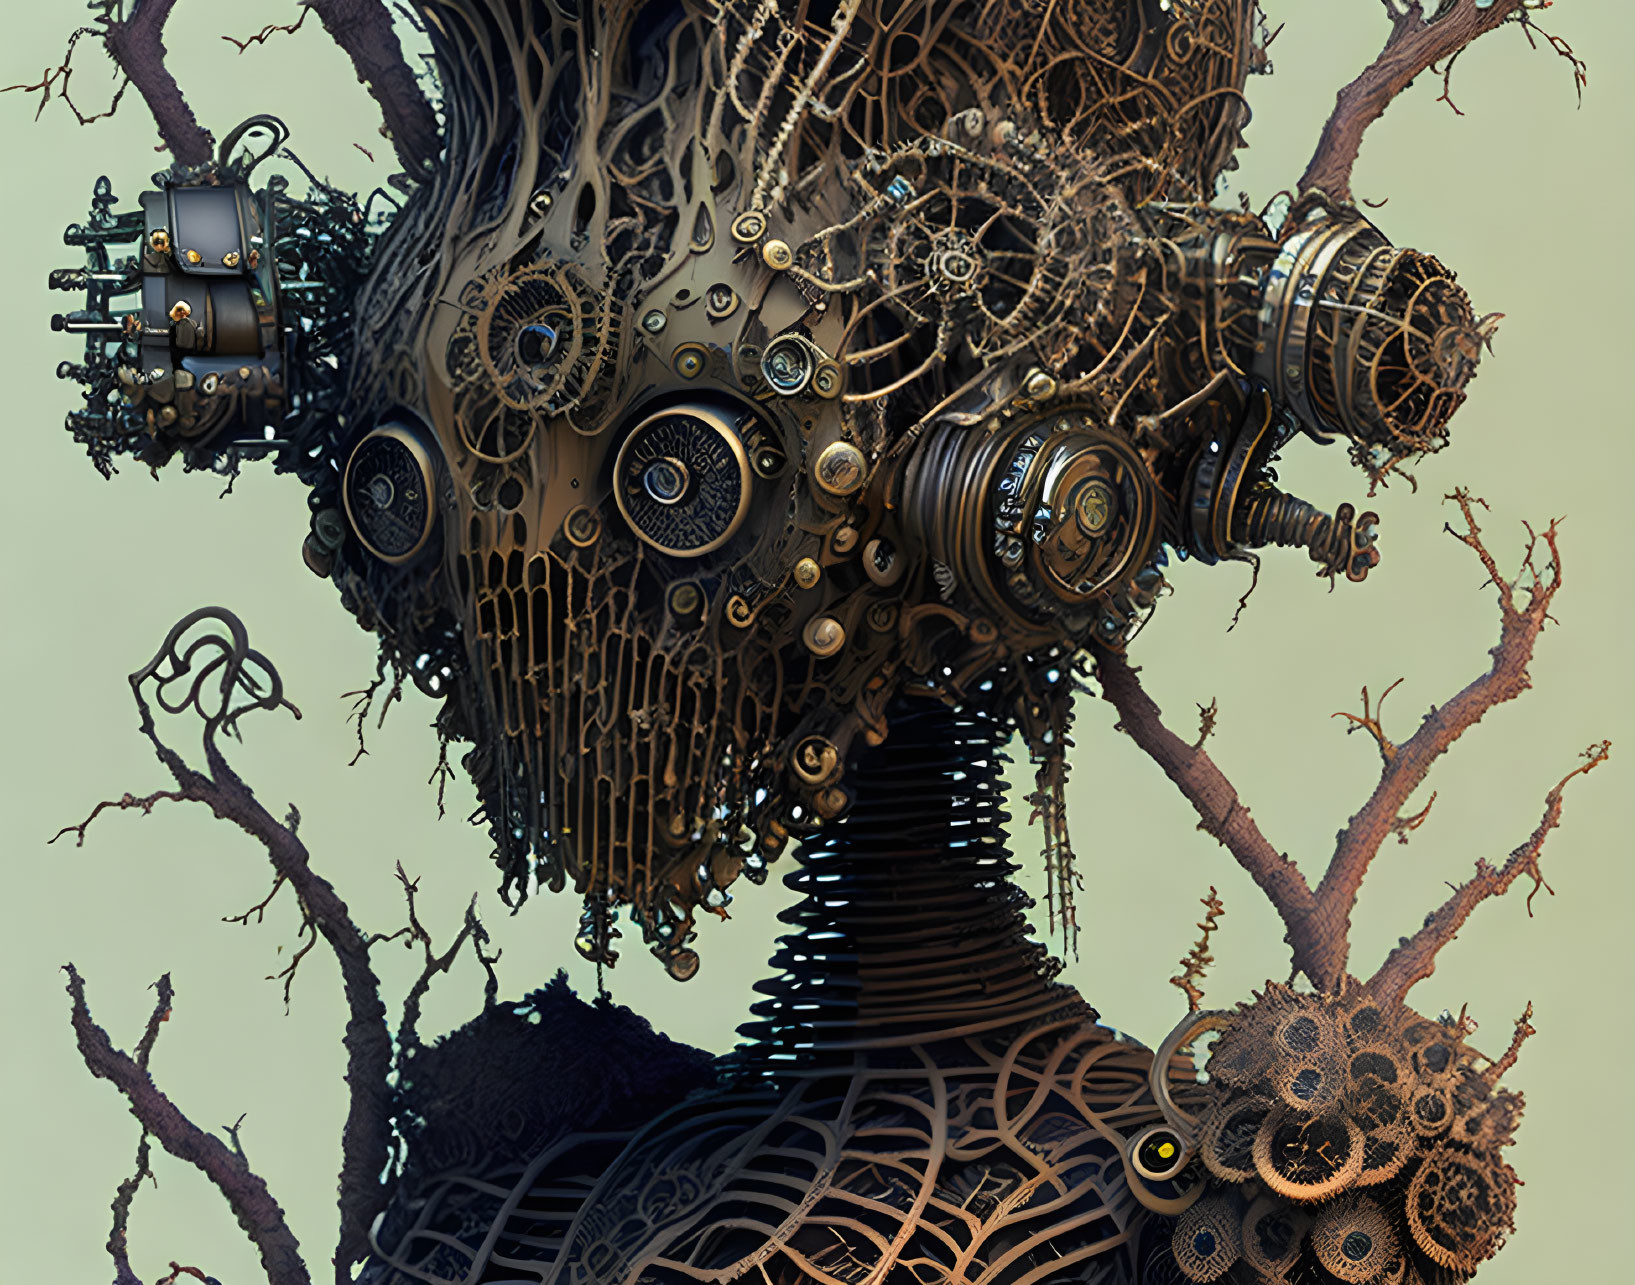 Intricate Steampunk Tree with Mechanical Elements and Gear Textures